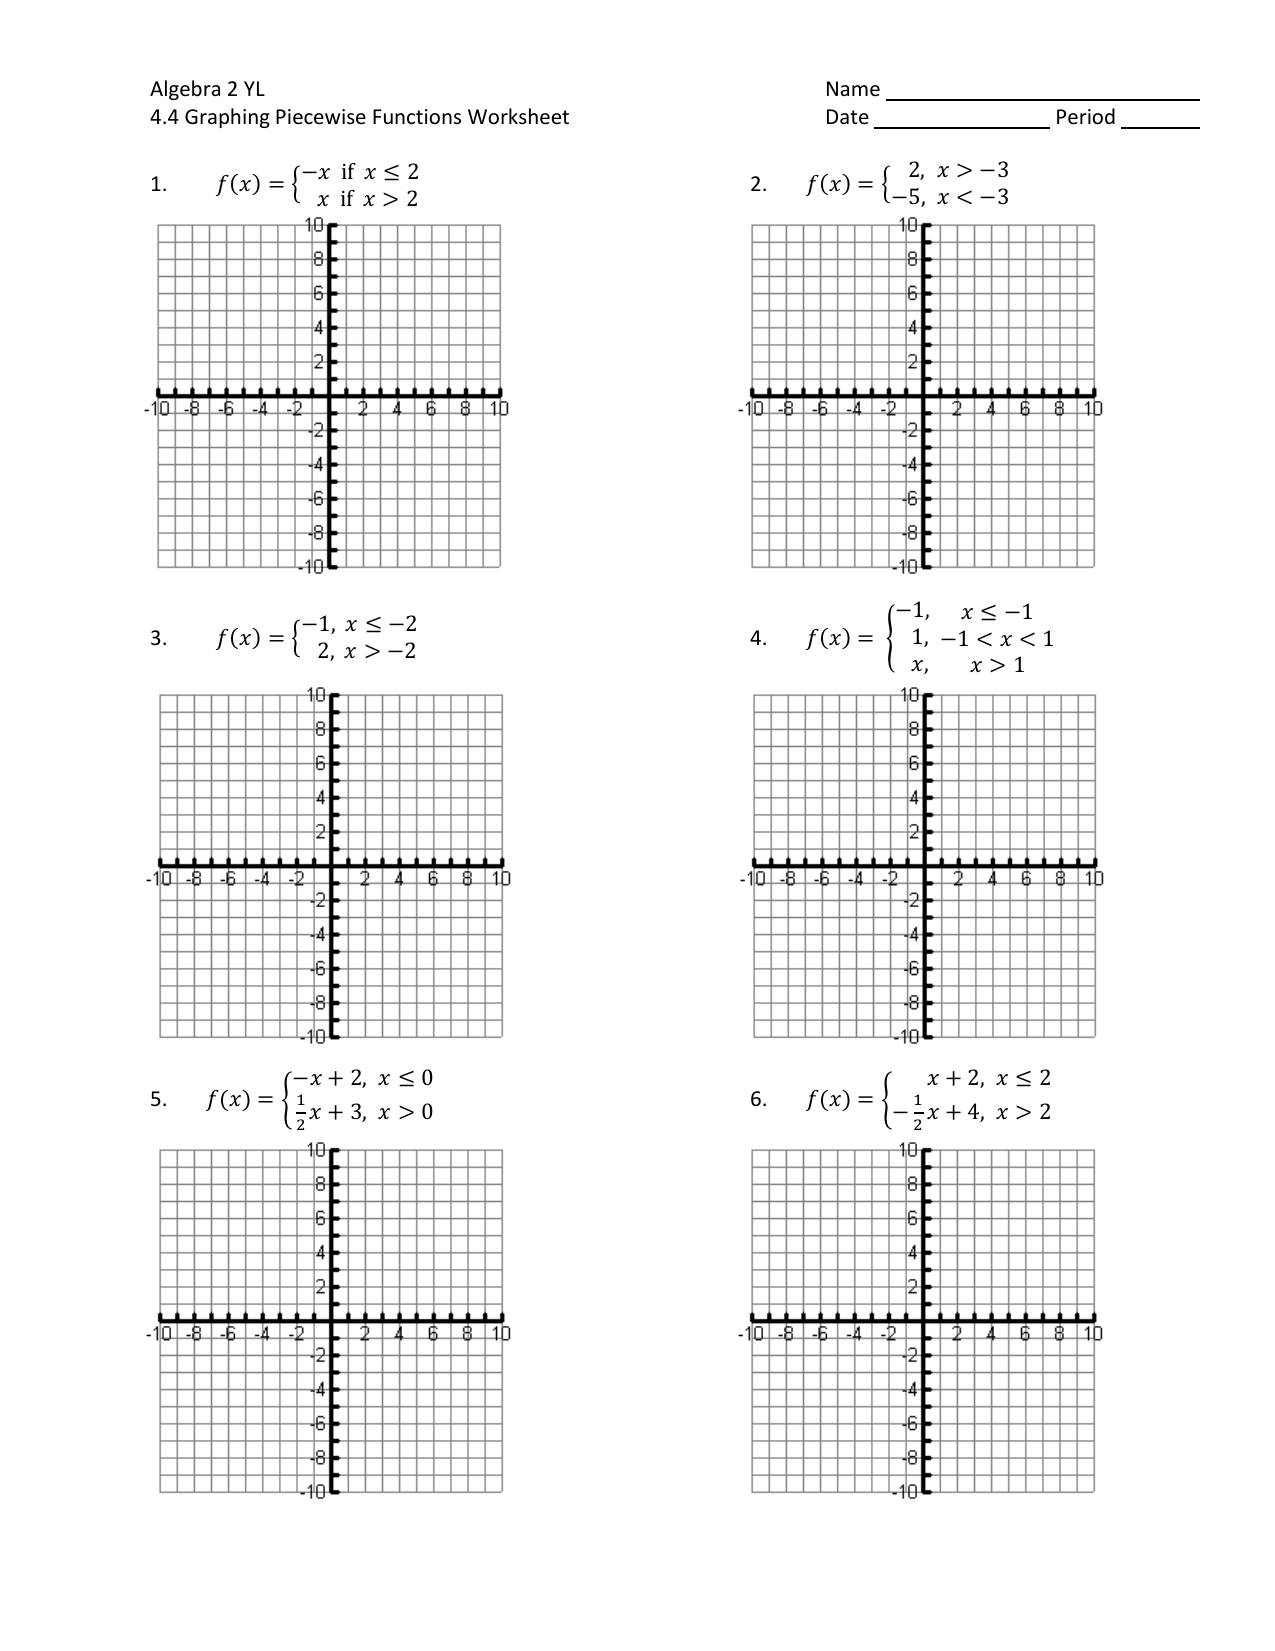 36 Algebra 2 Yl 4 4 Graphing Piecewise Functions Worksheet Support 